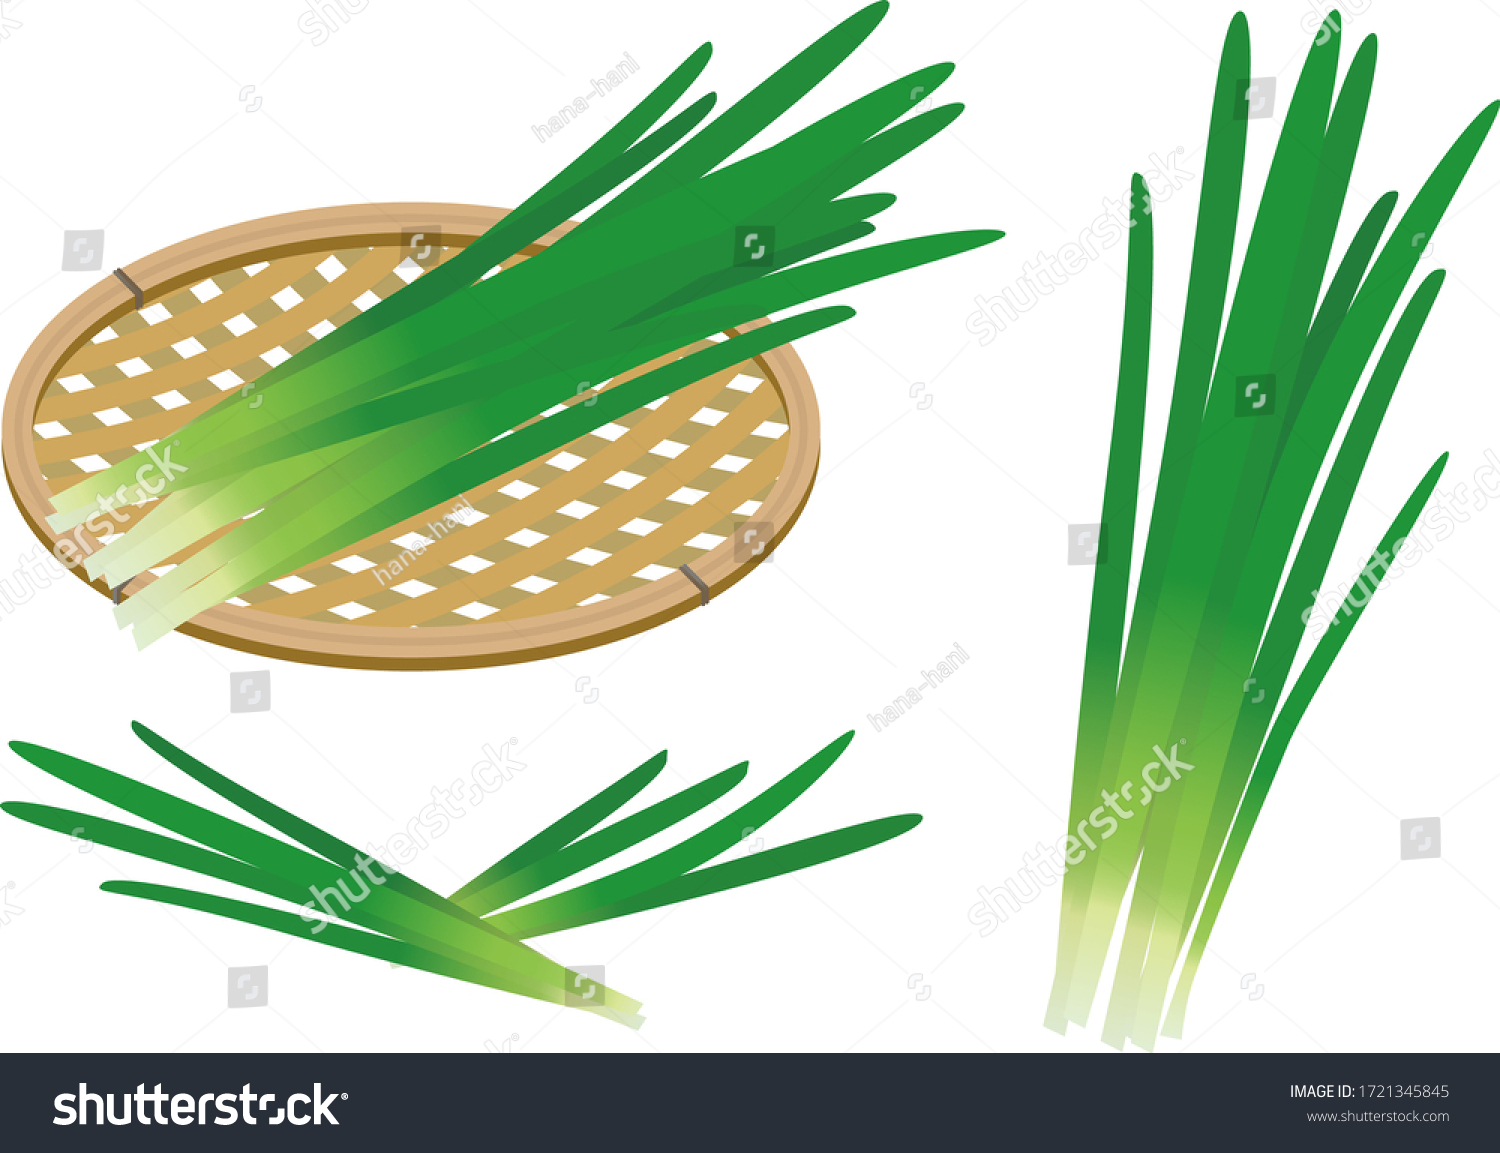 SVG of Illustration of two bunches of chives on a white background. svg